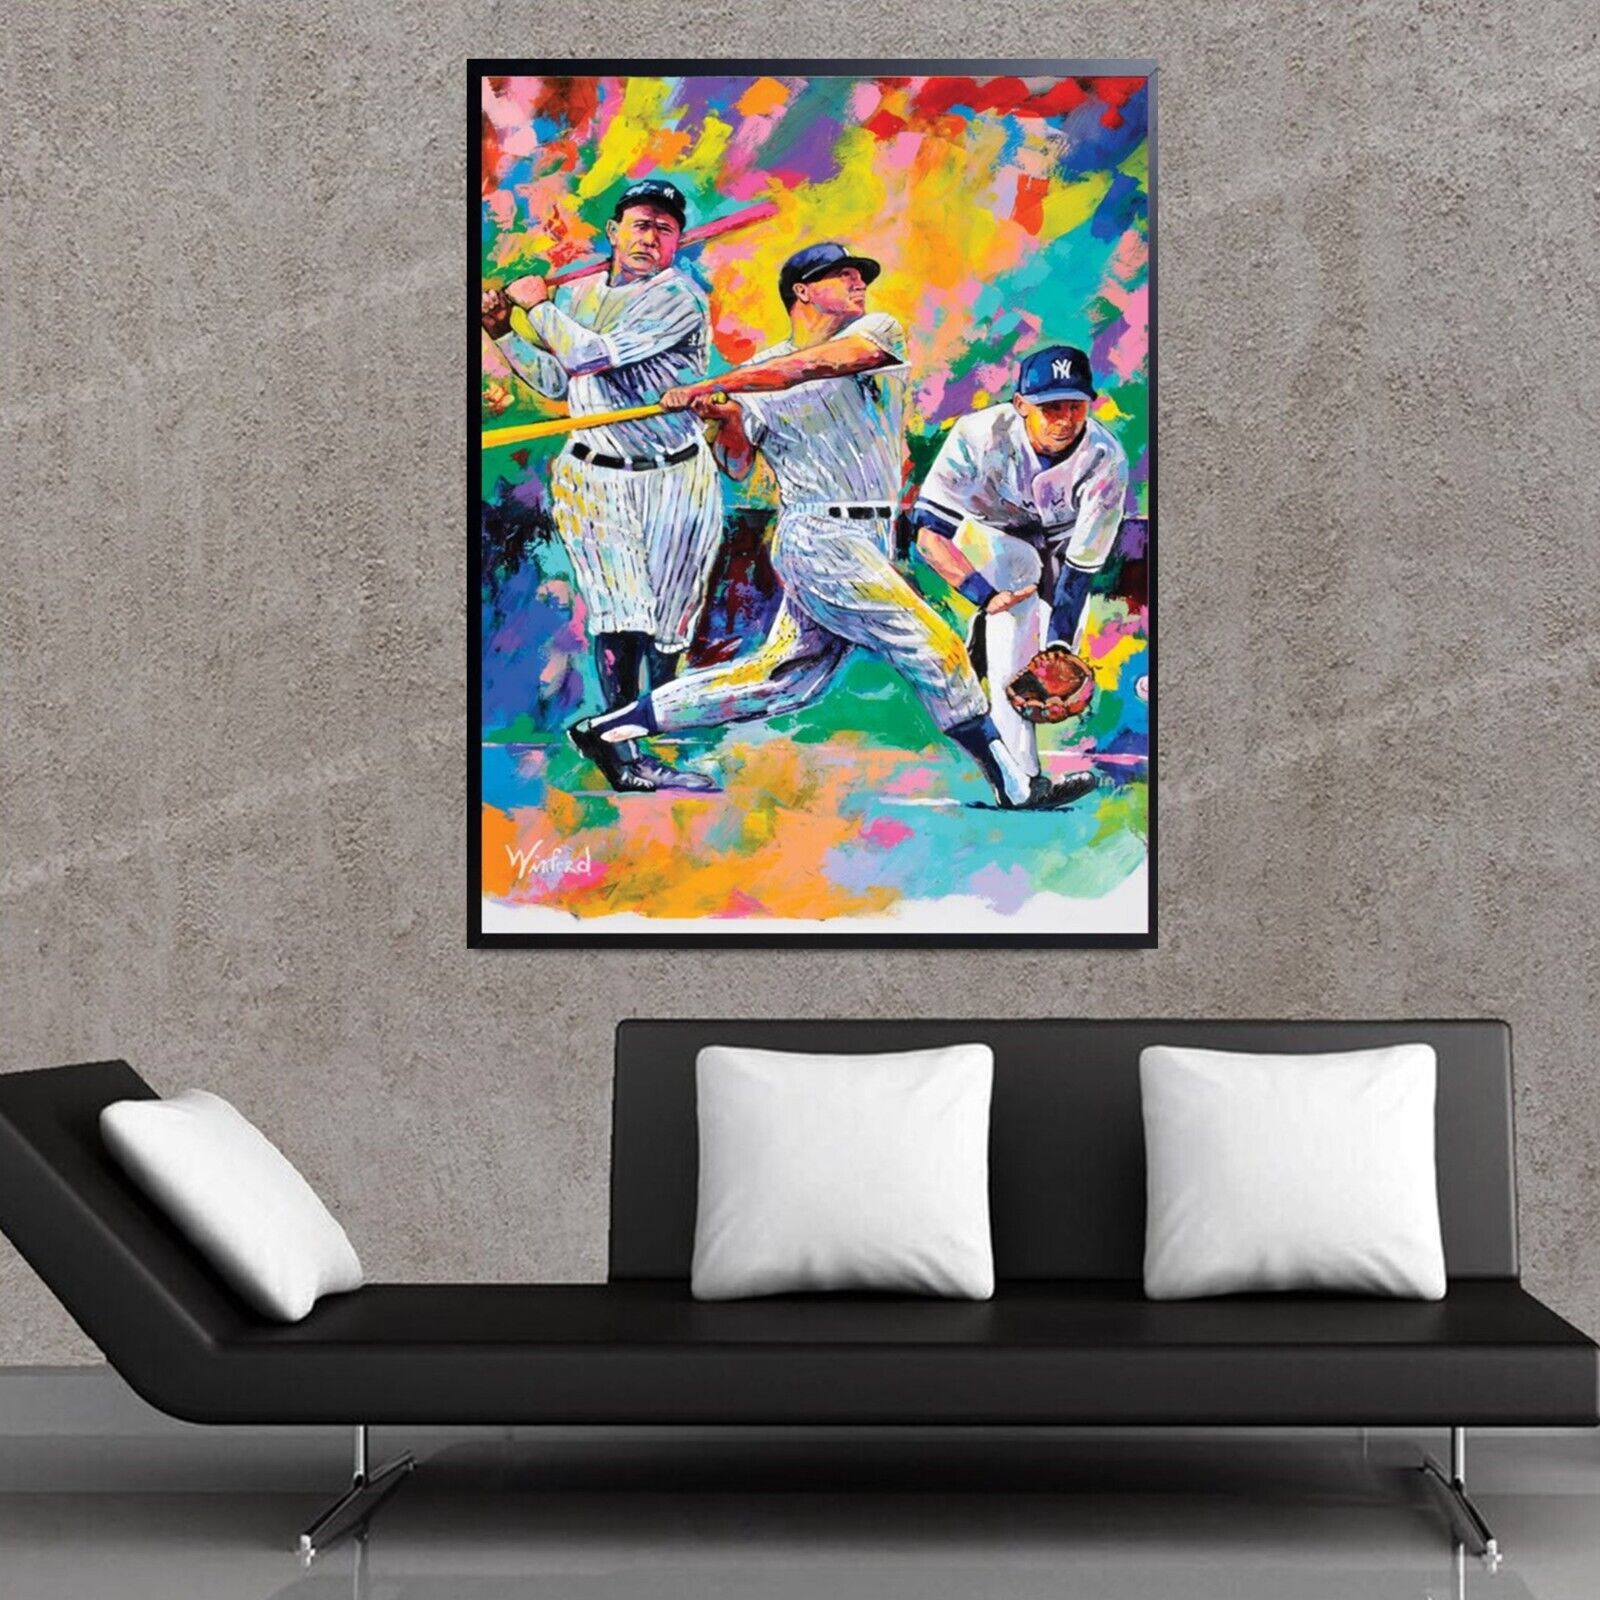 Sale Ruth Mantle Jeter Yankees Hand-Textured 36H X 24W Canvas Giclee 795 Now 275